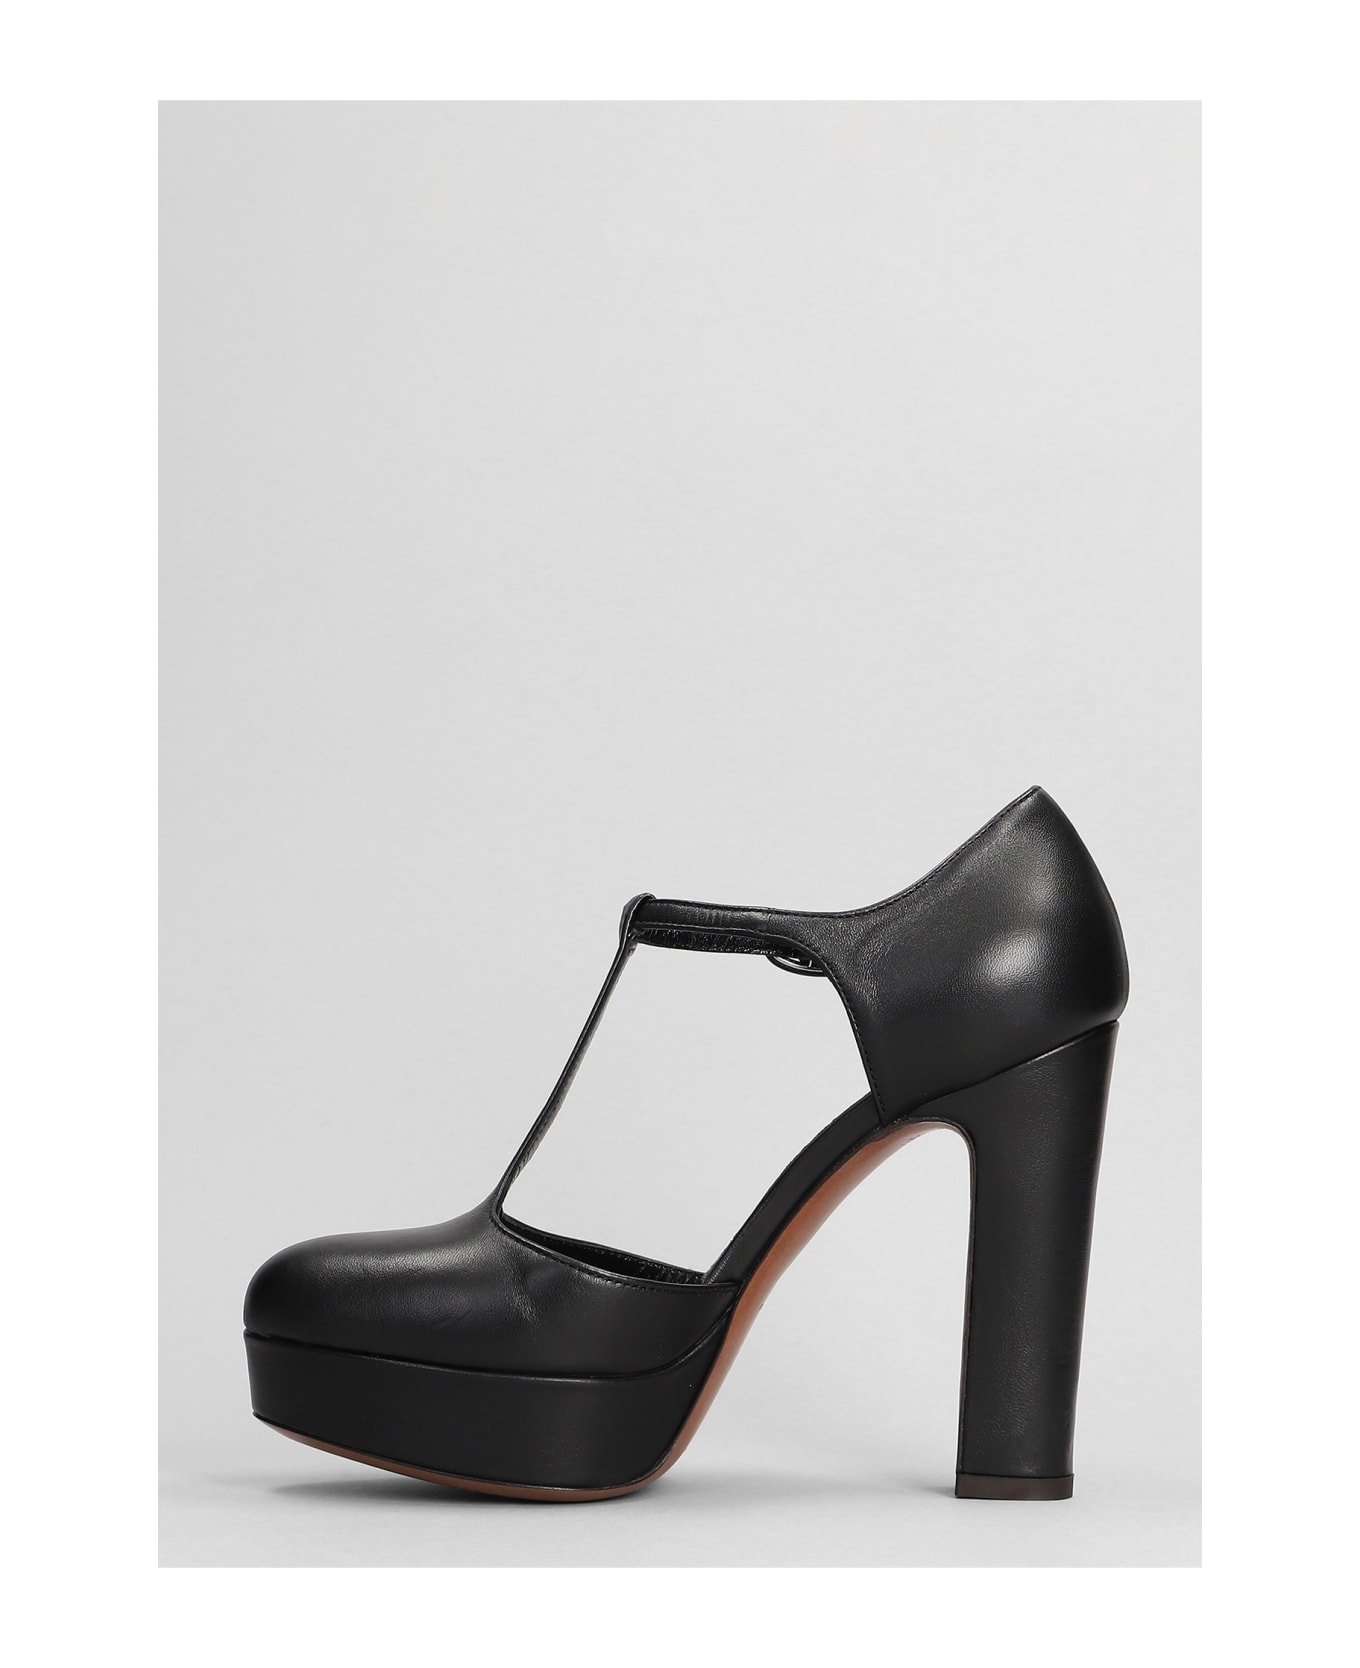 Relac Pumps In Black Leather - Antracite